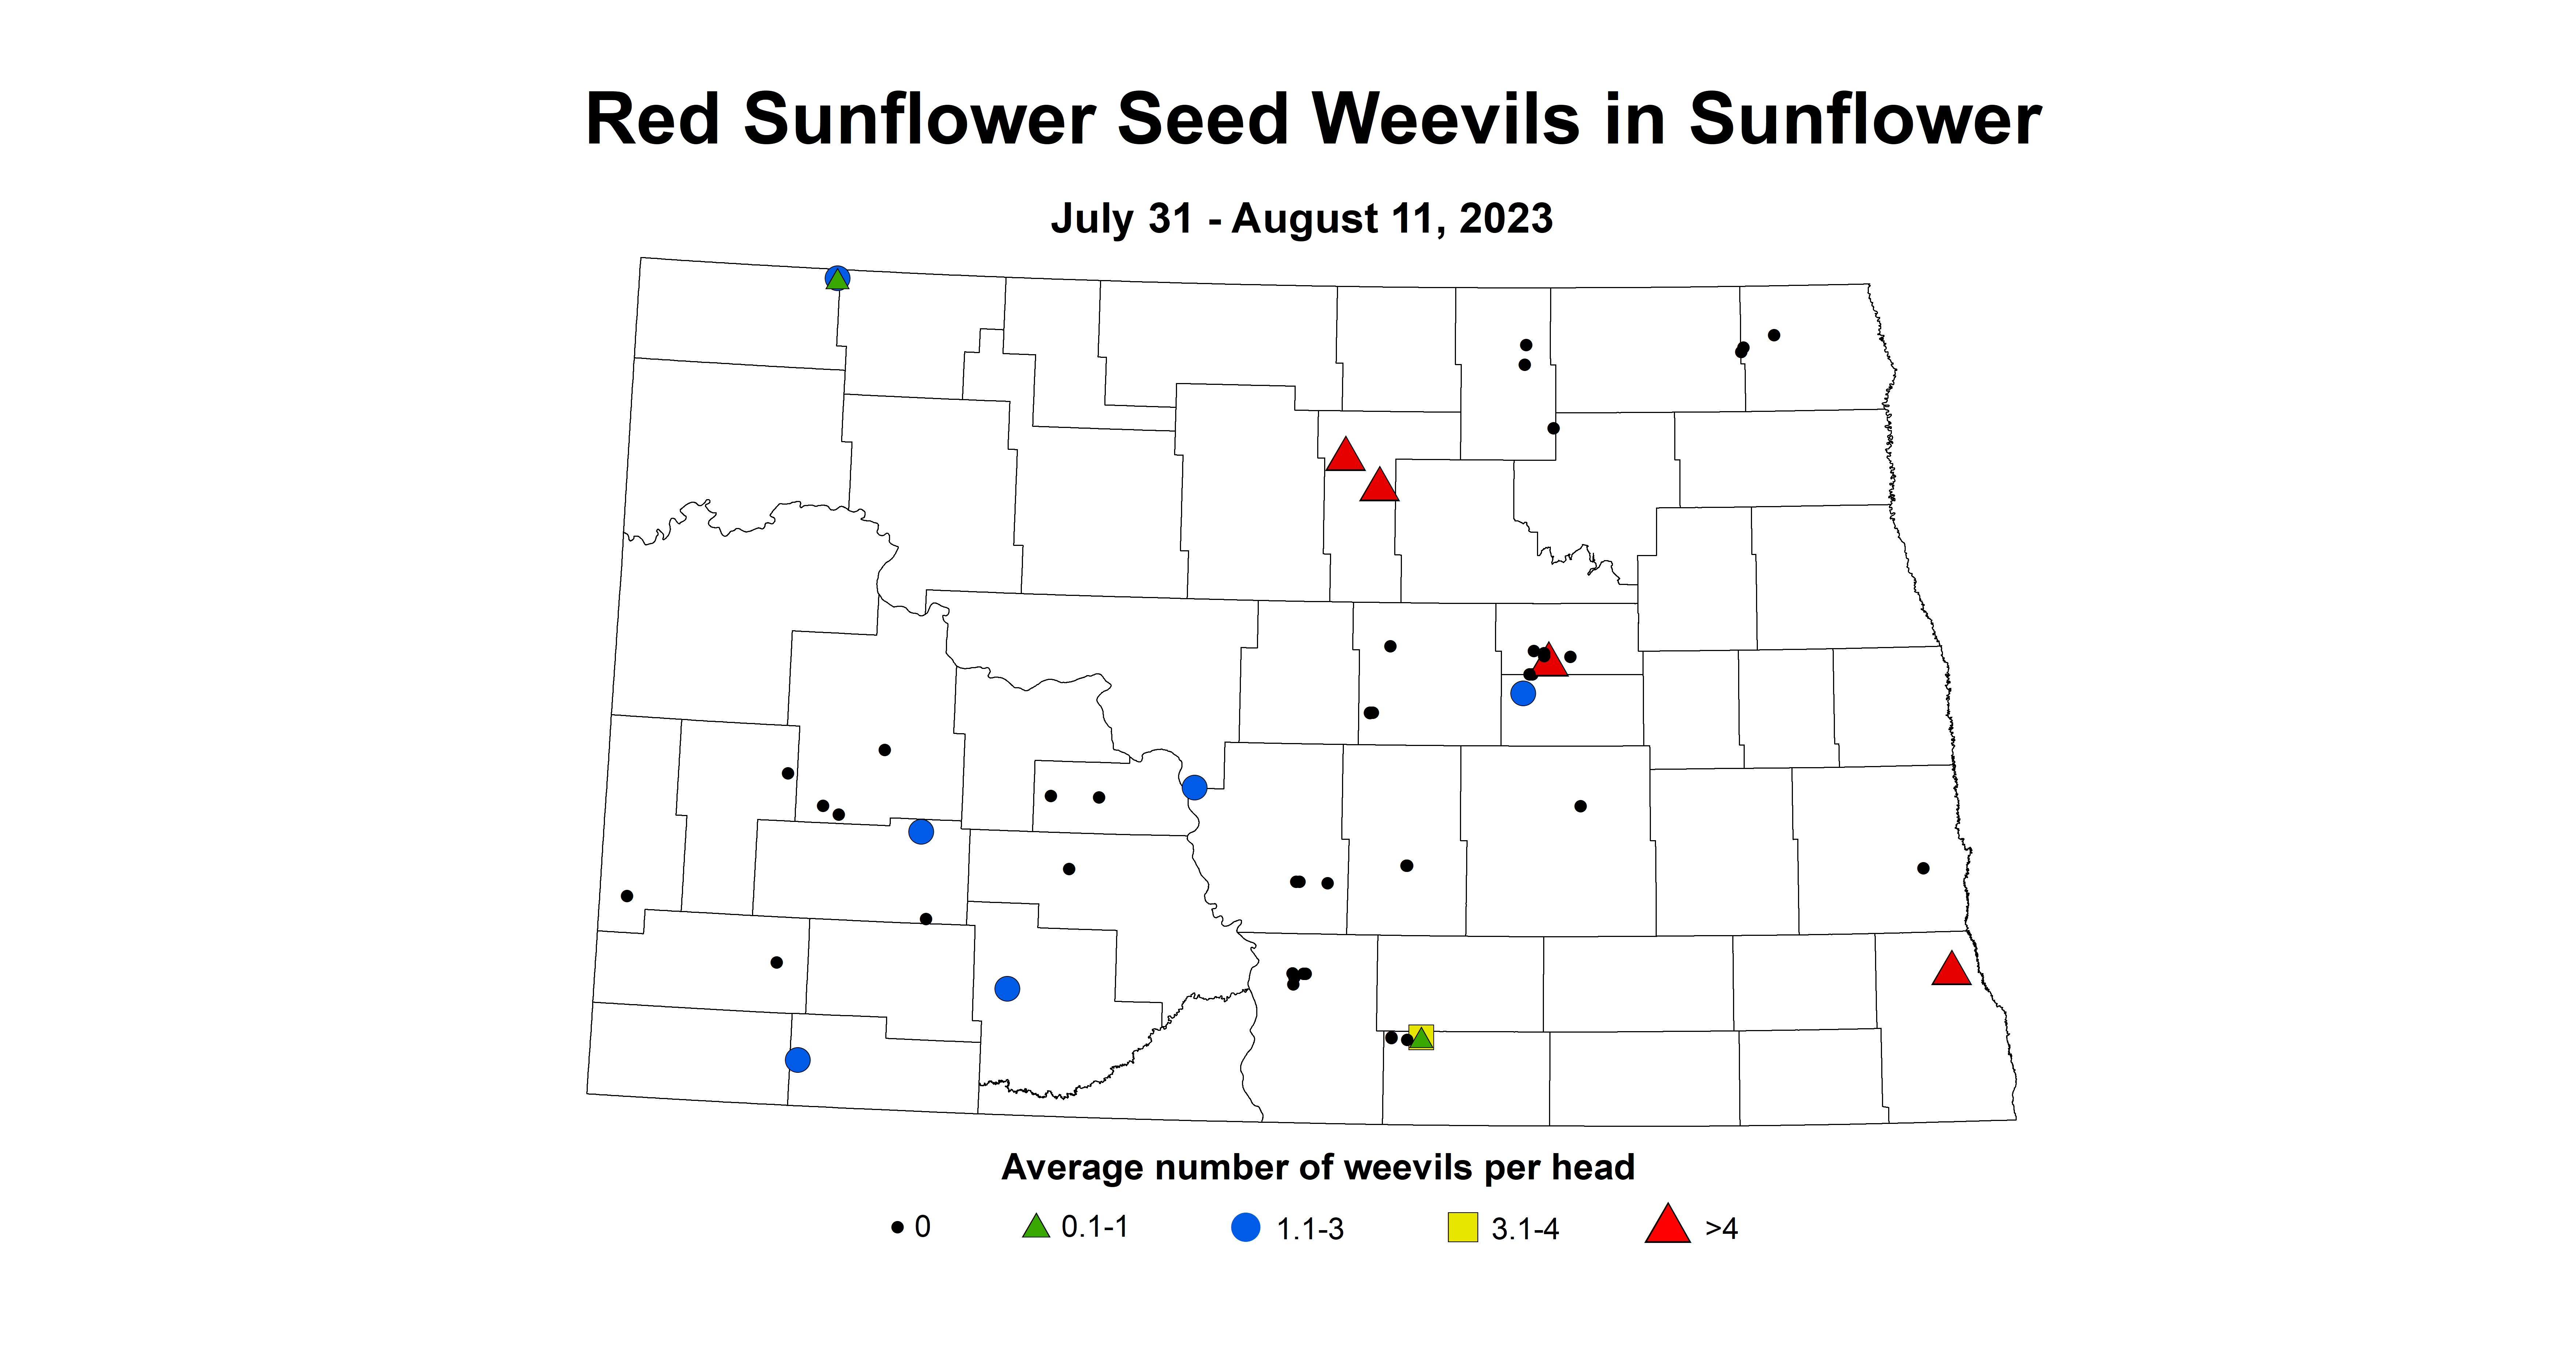 red sunflower seed weevils 7.31-8.11 2023